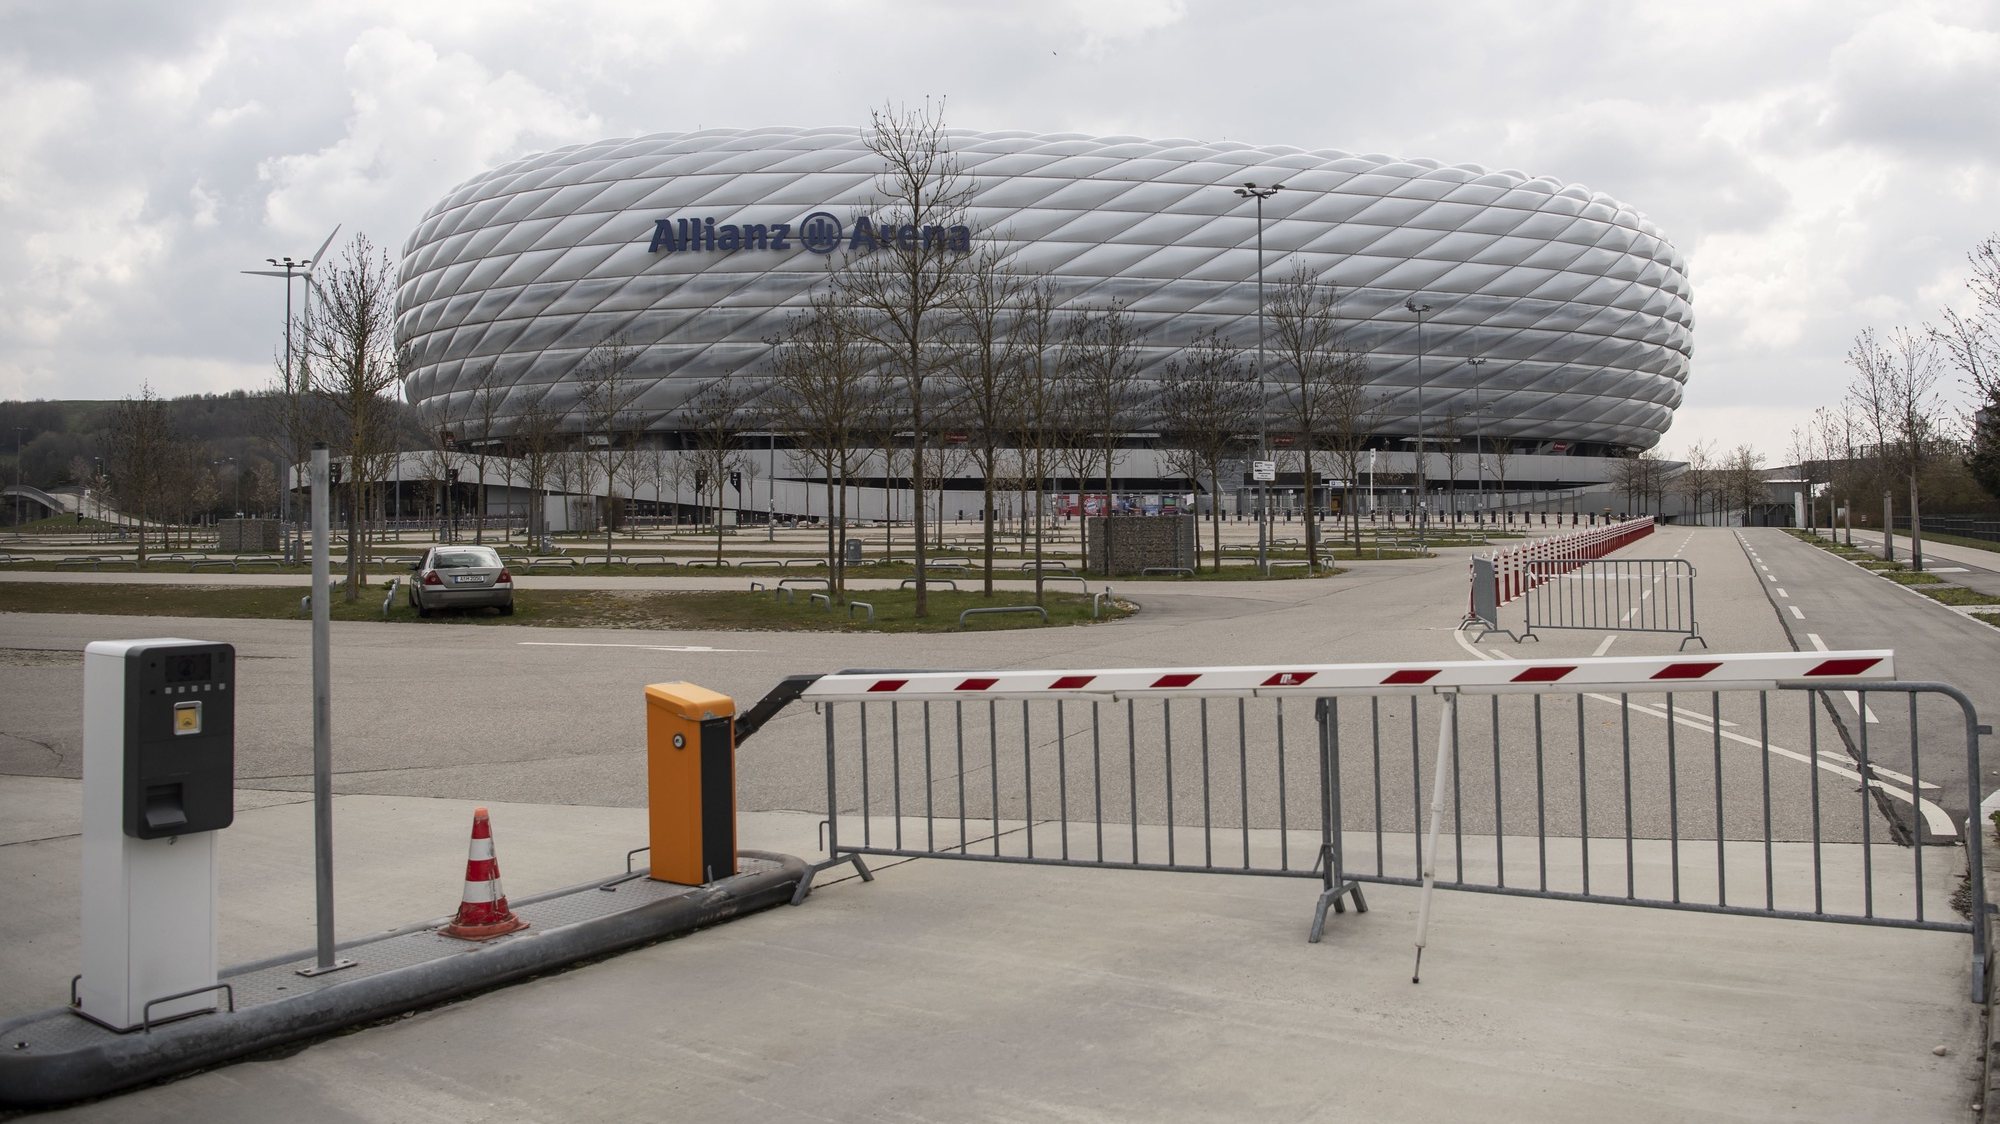 epa09145480 General view of the Allianz Arena, stadium of German Bundesliga side Bayern Munich, in Munich, Germany, 19 April 2021. The Mayor of Munich, Dieter Reiter, said on 19 April 2021, that fans could still be barred from attending EURO 2020 soccer matches in Munich, although the UEFA seeks guarantees that there will be supporters allowed in the stands.  EPA/LUKAS BARTH-TUTTAS